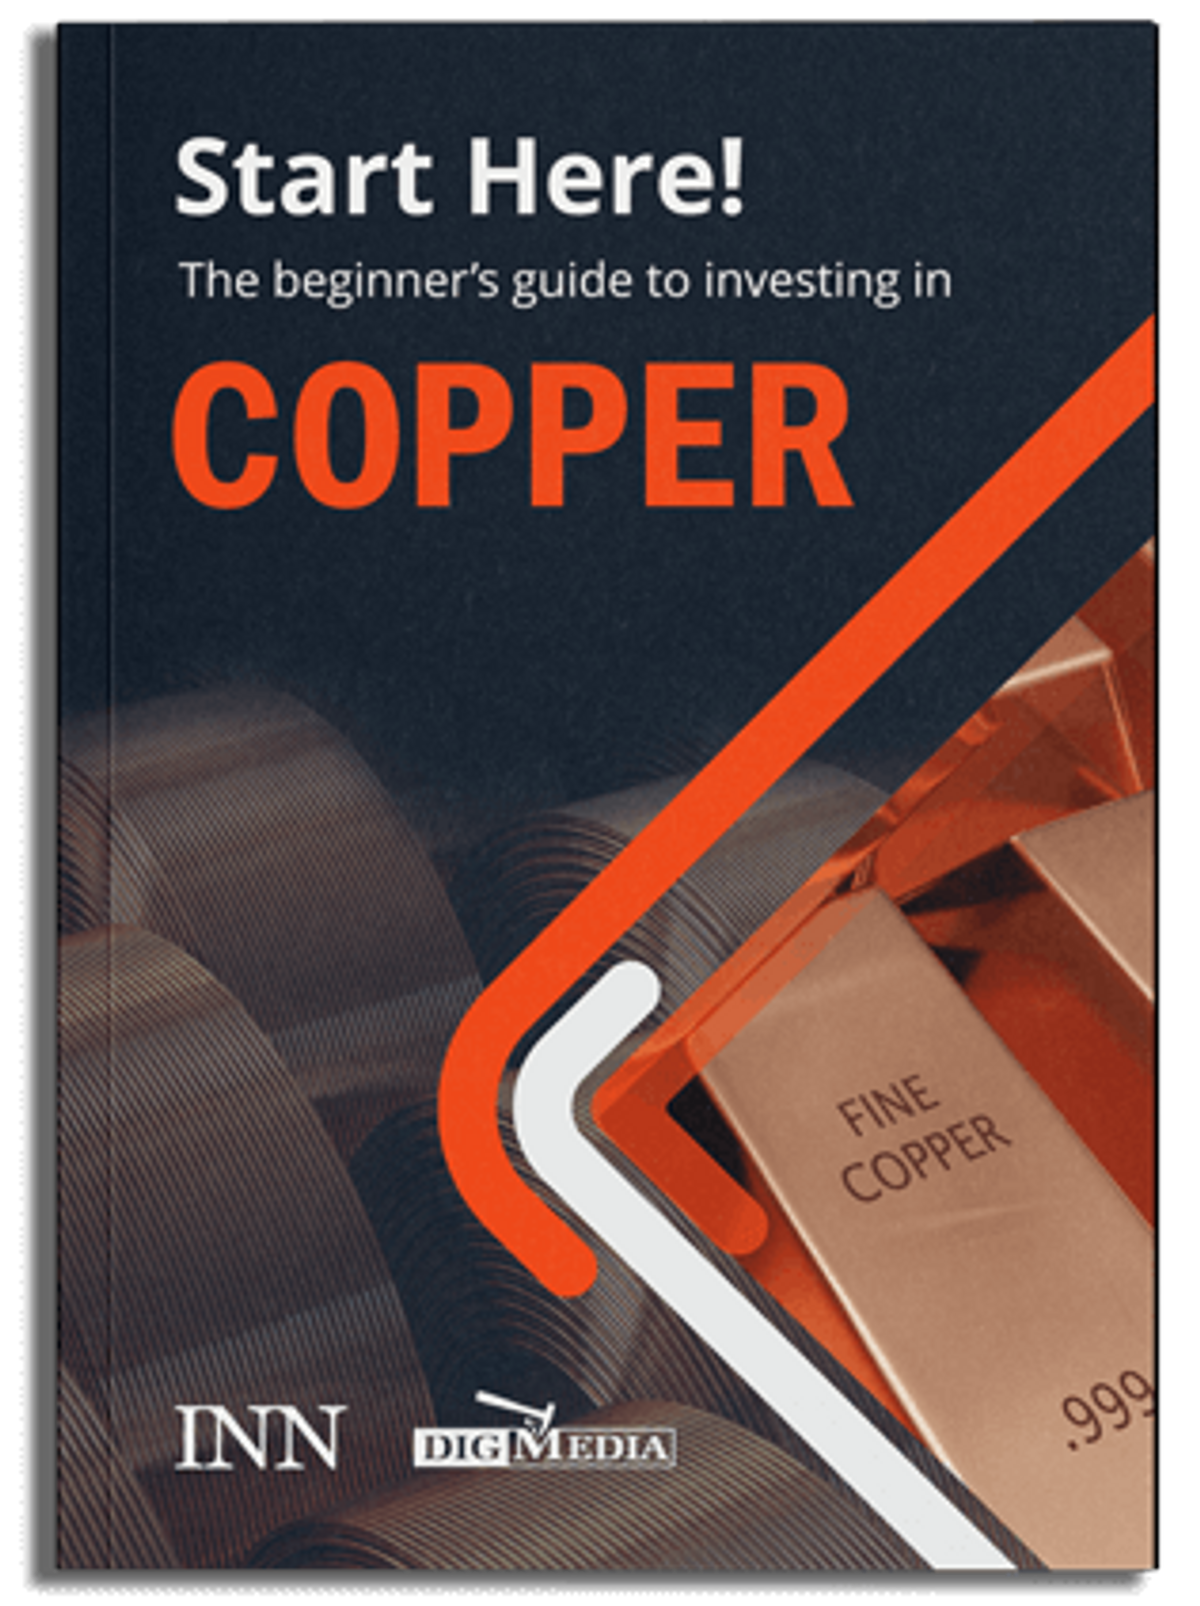 The Beginner's Guide to Investing in Copper